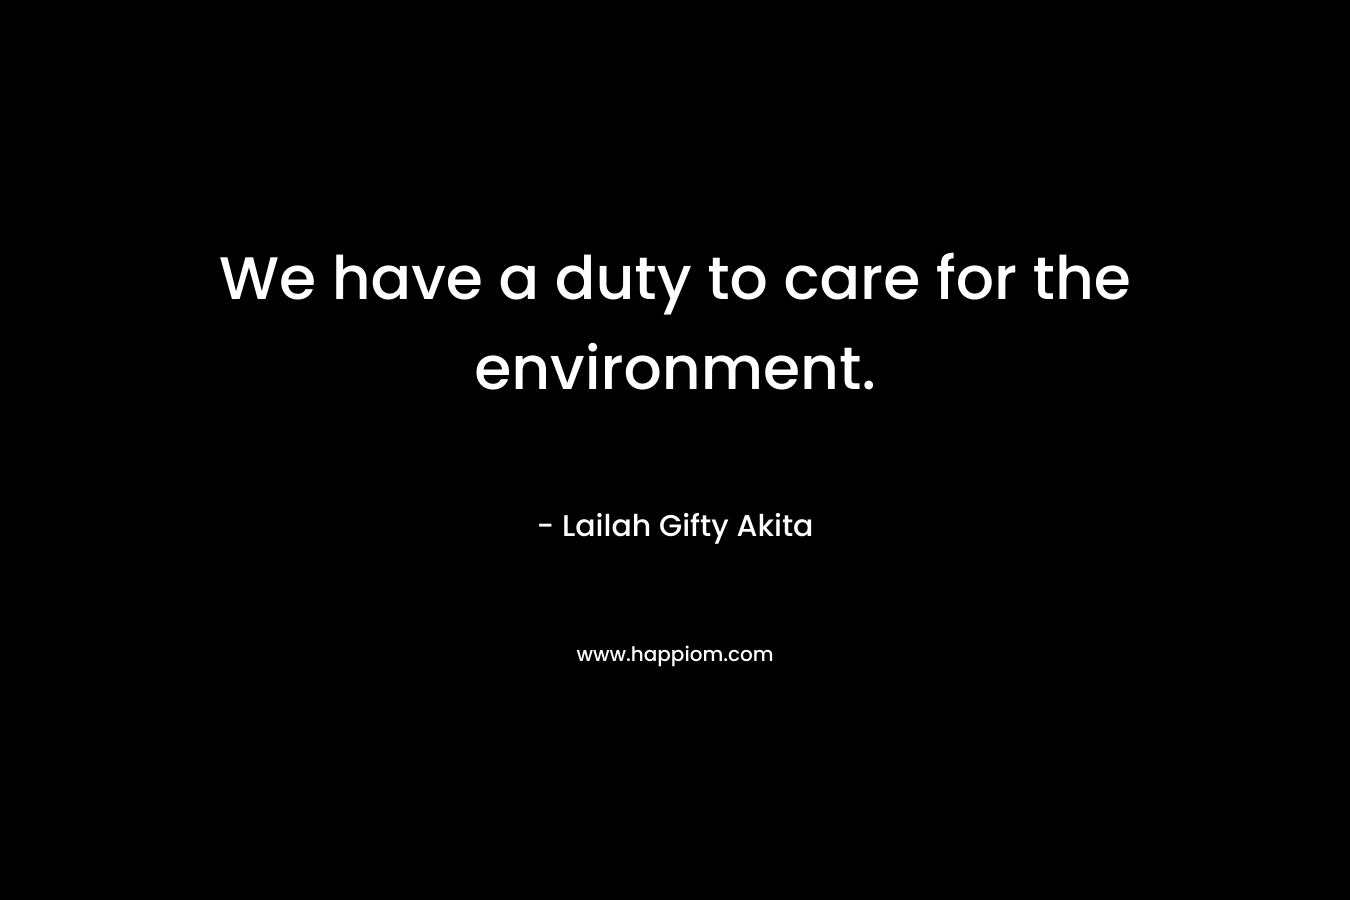 We have a duty to care for the environment.